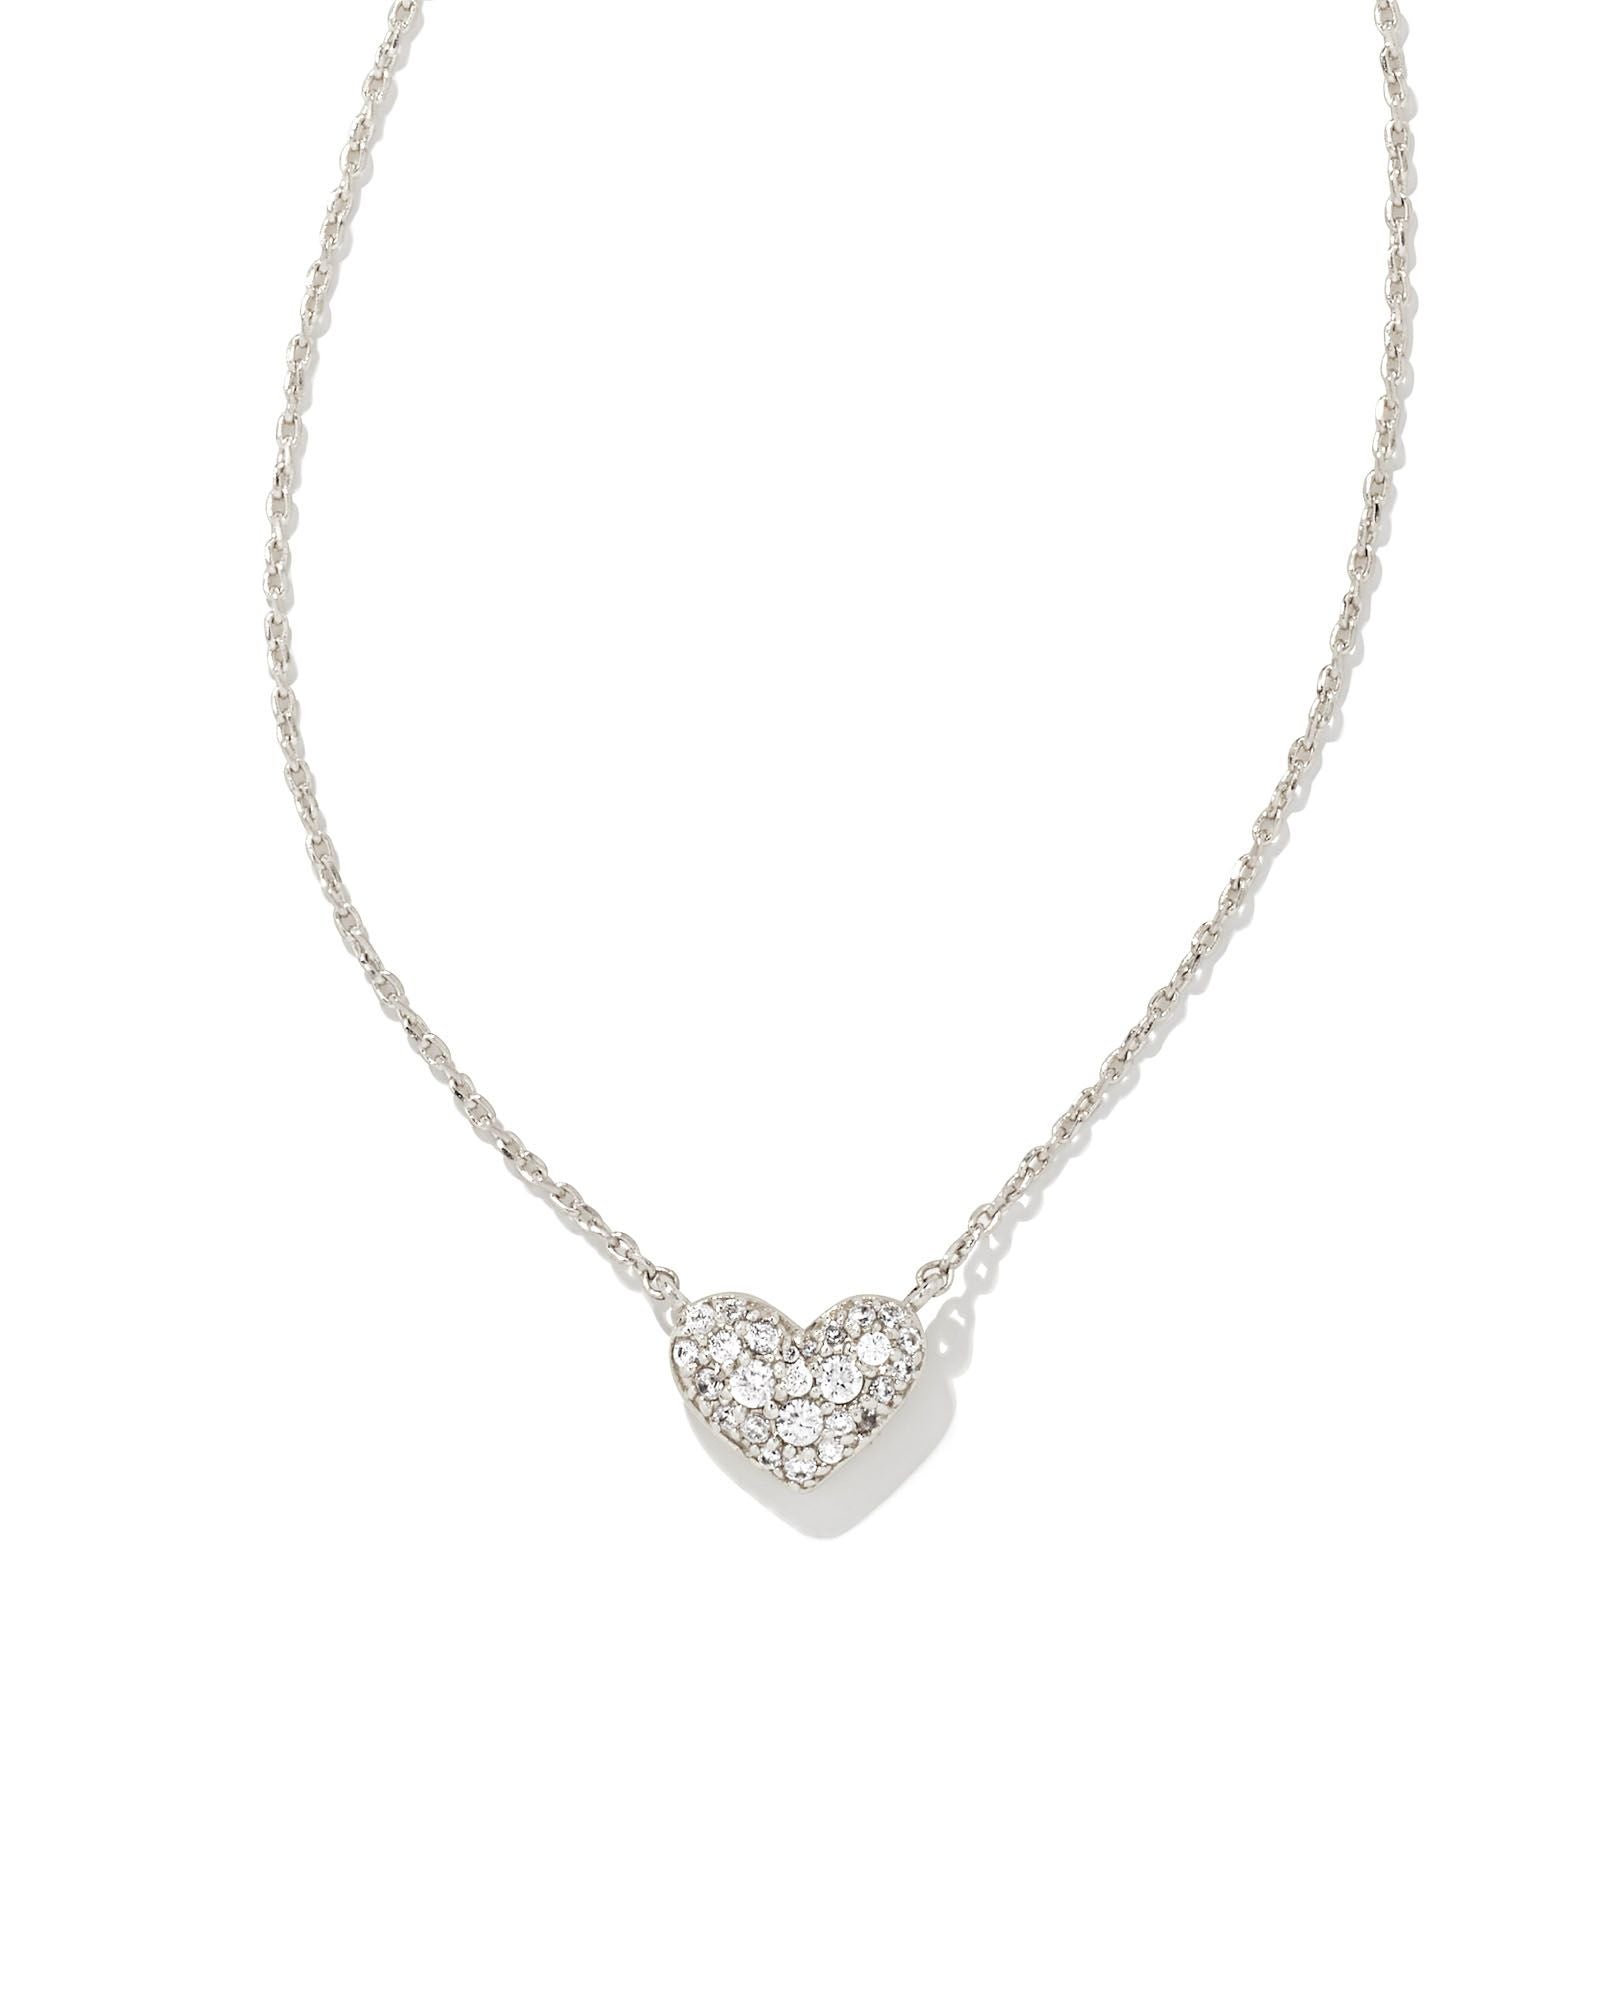 Ari Pave Crystal Heart Necklace in Rhodium Metal White CZ